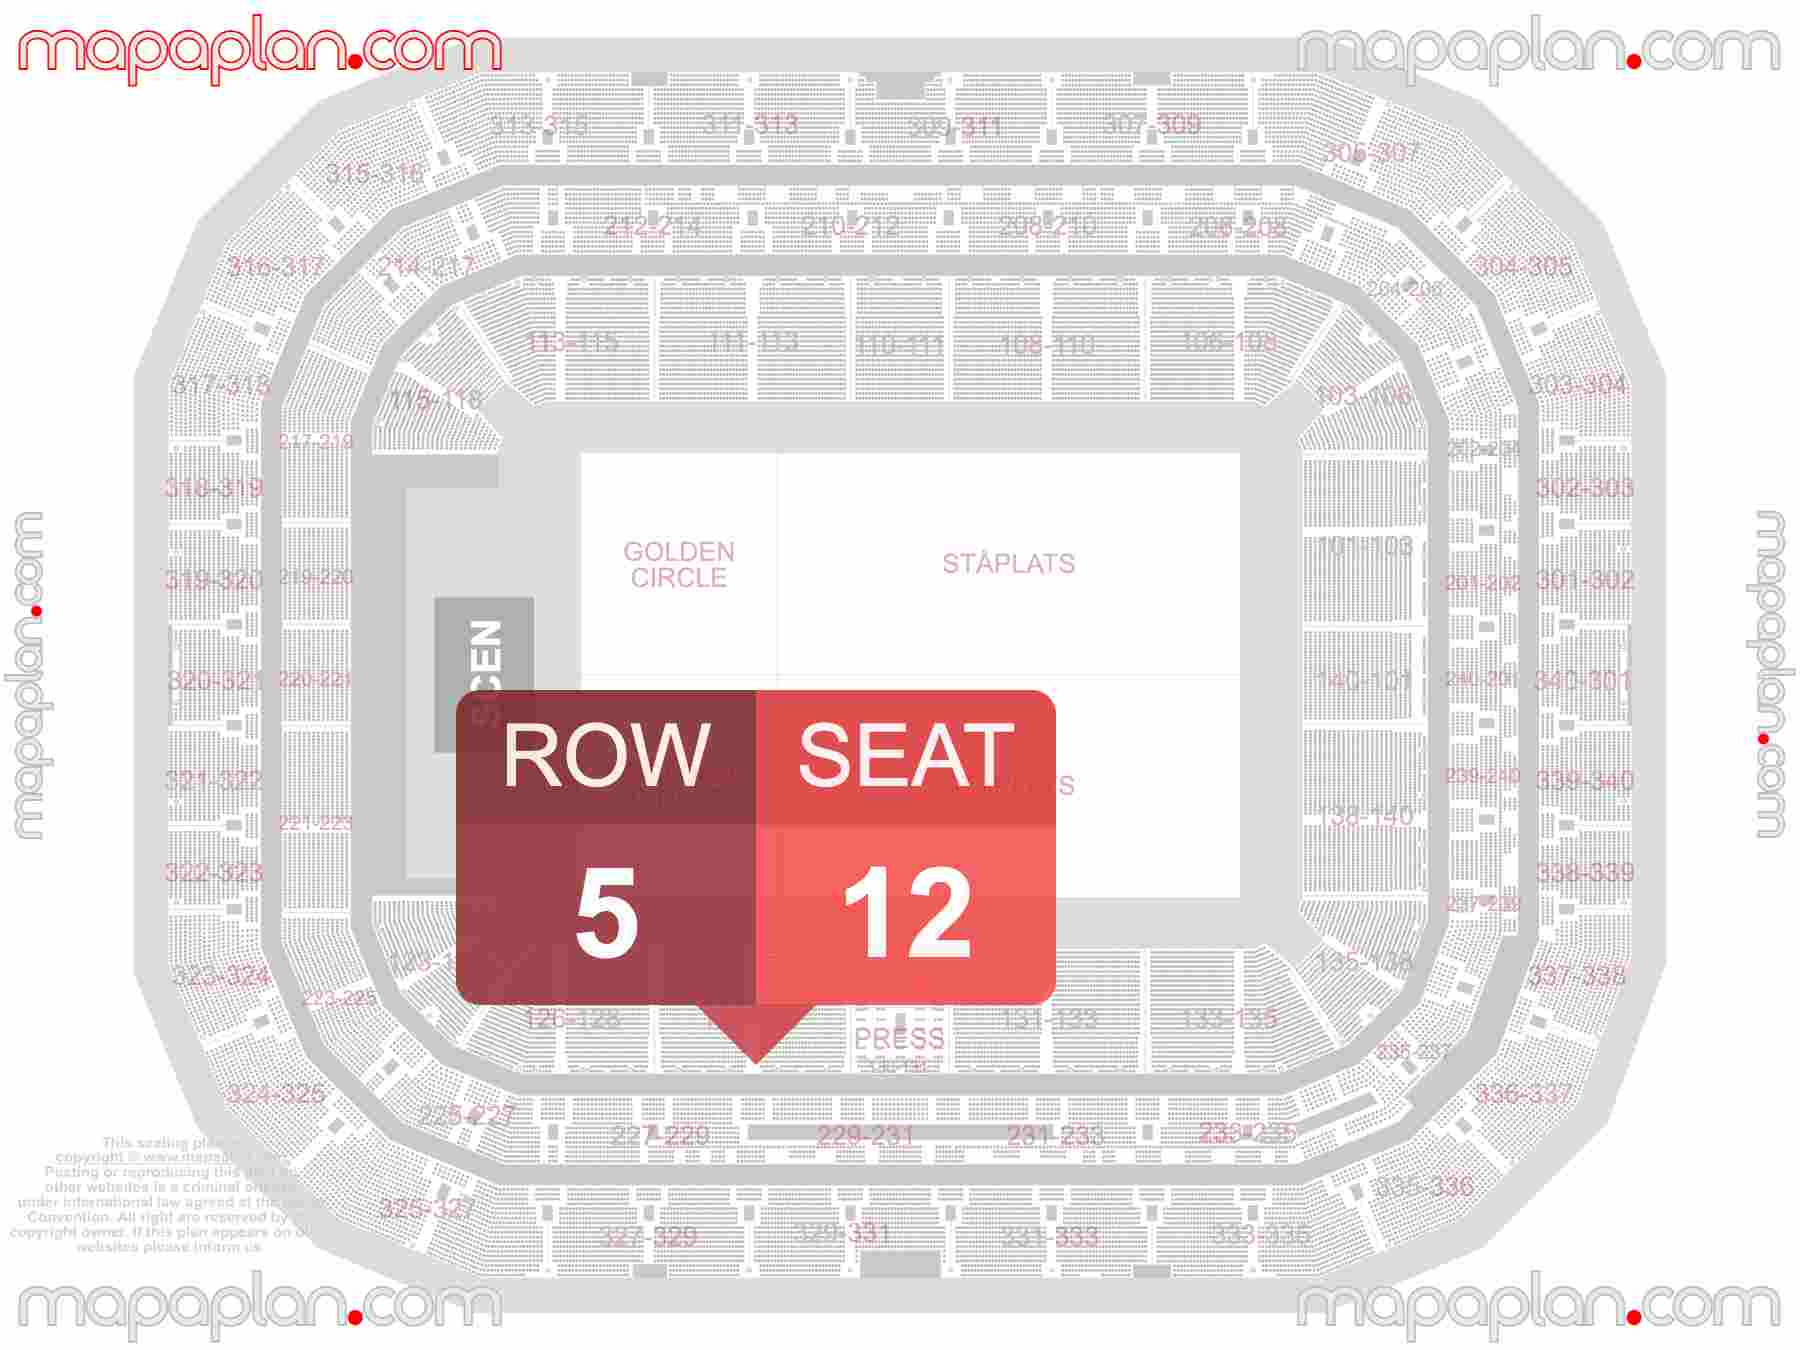 Stockholm Strawberry Friends Arena seating plan Concert sittplan med sektioner sittplatser platsnummer karta detailed seat numbers and row numbering plan with interactive map map layout